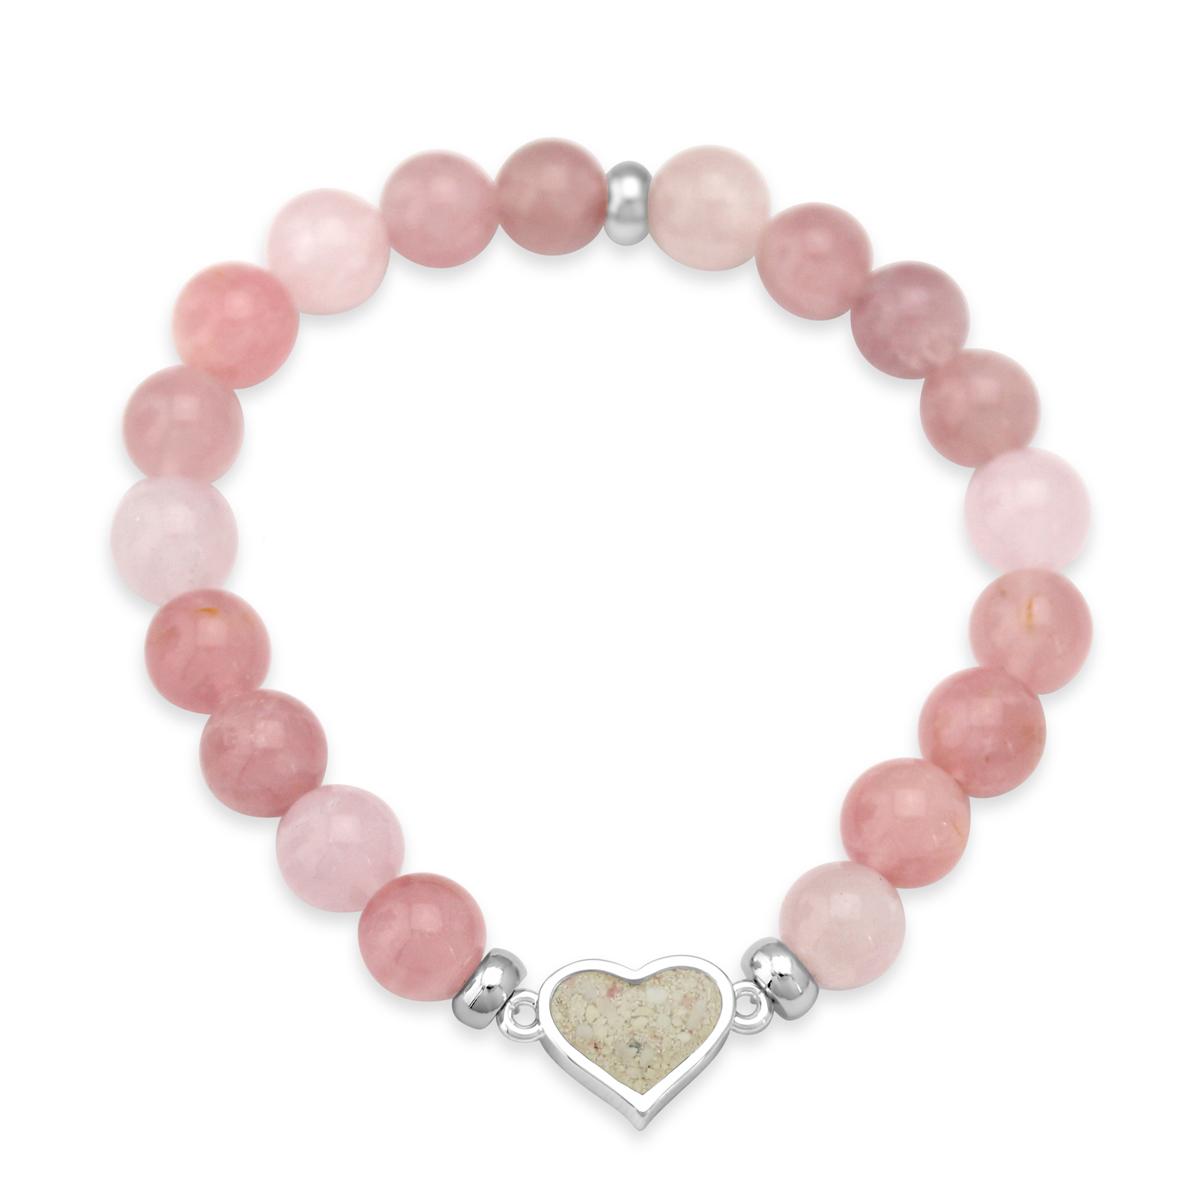 Natural rose quartz beaded bracelet with a heart-shaped sand setting. The perfect Valentine's gift.